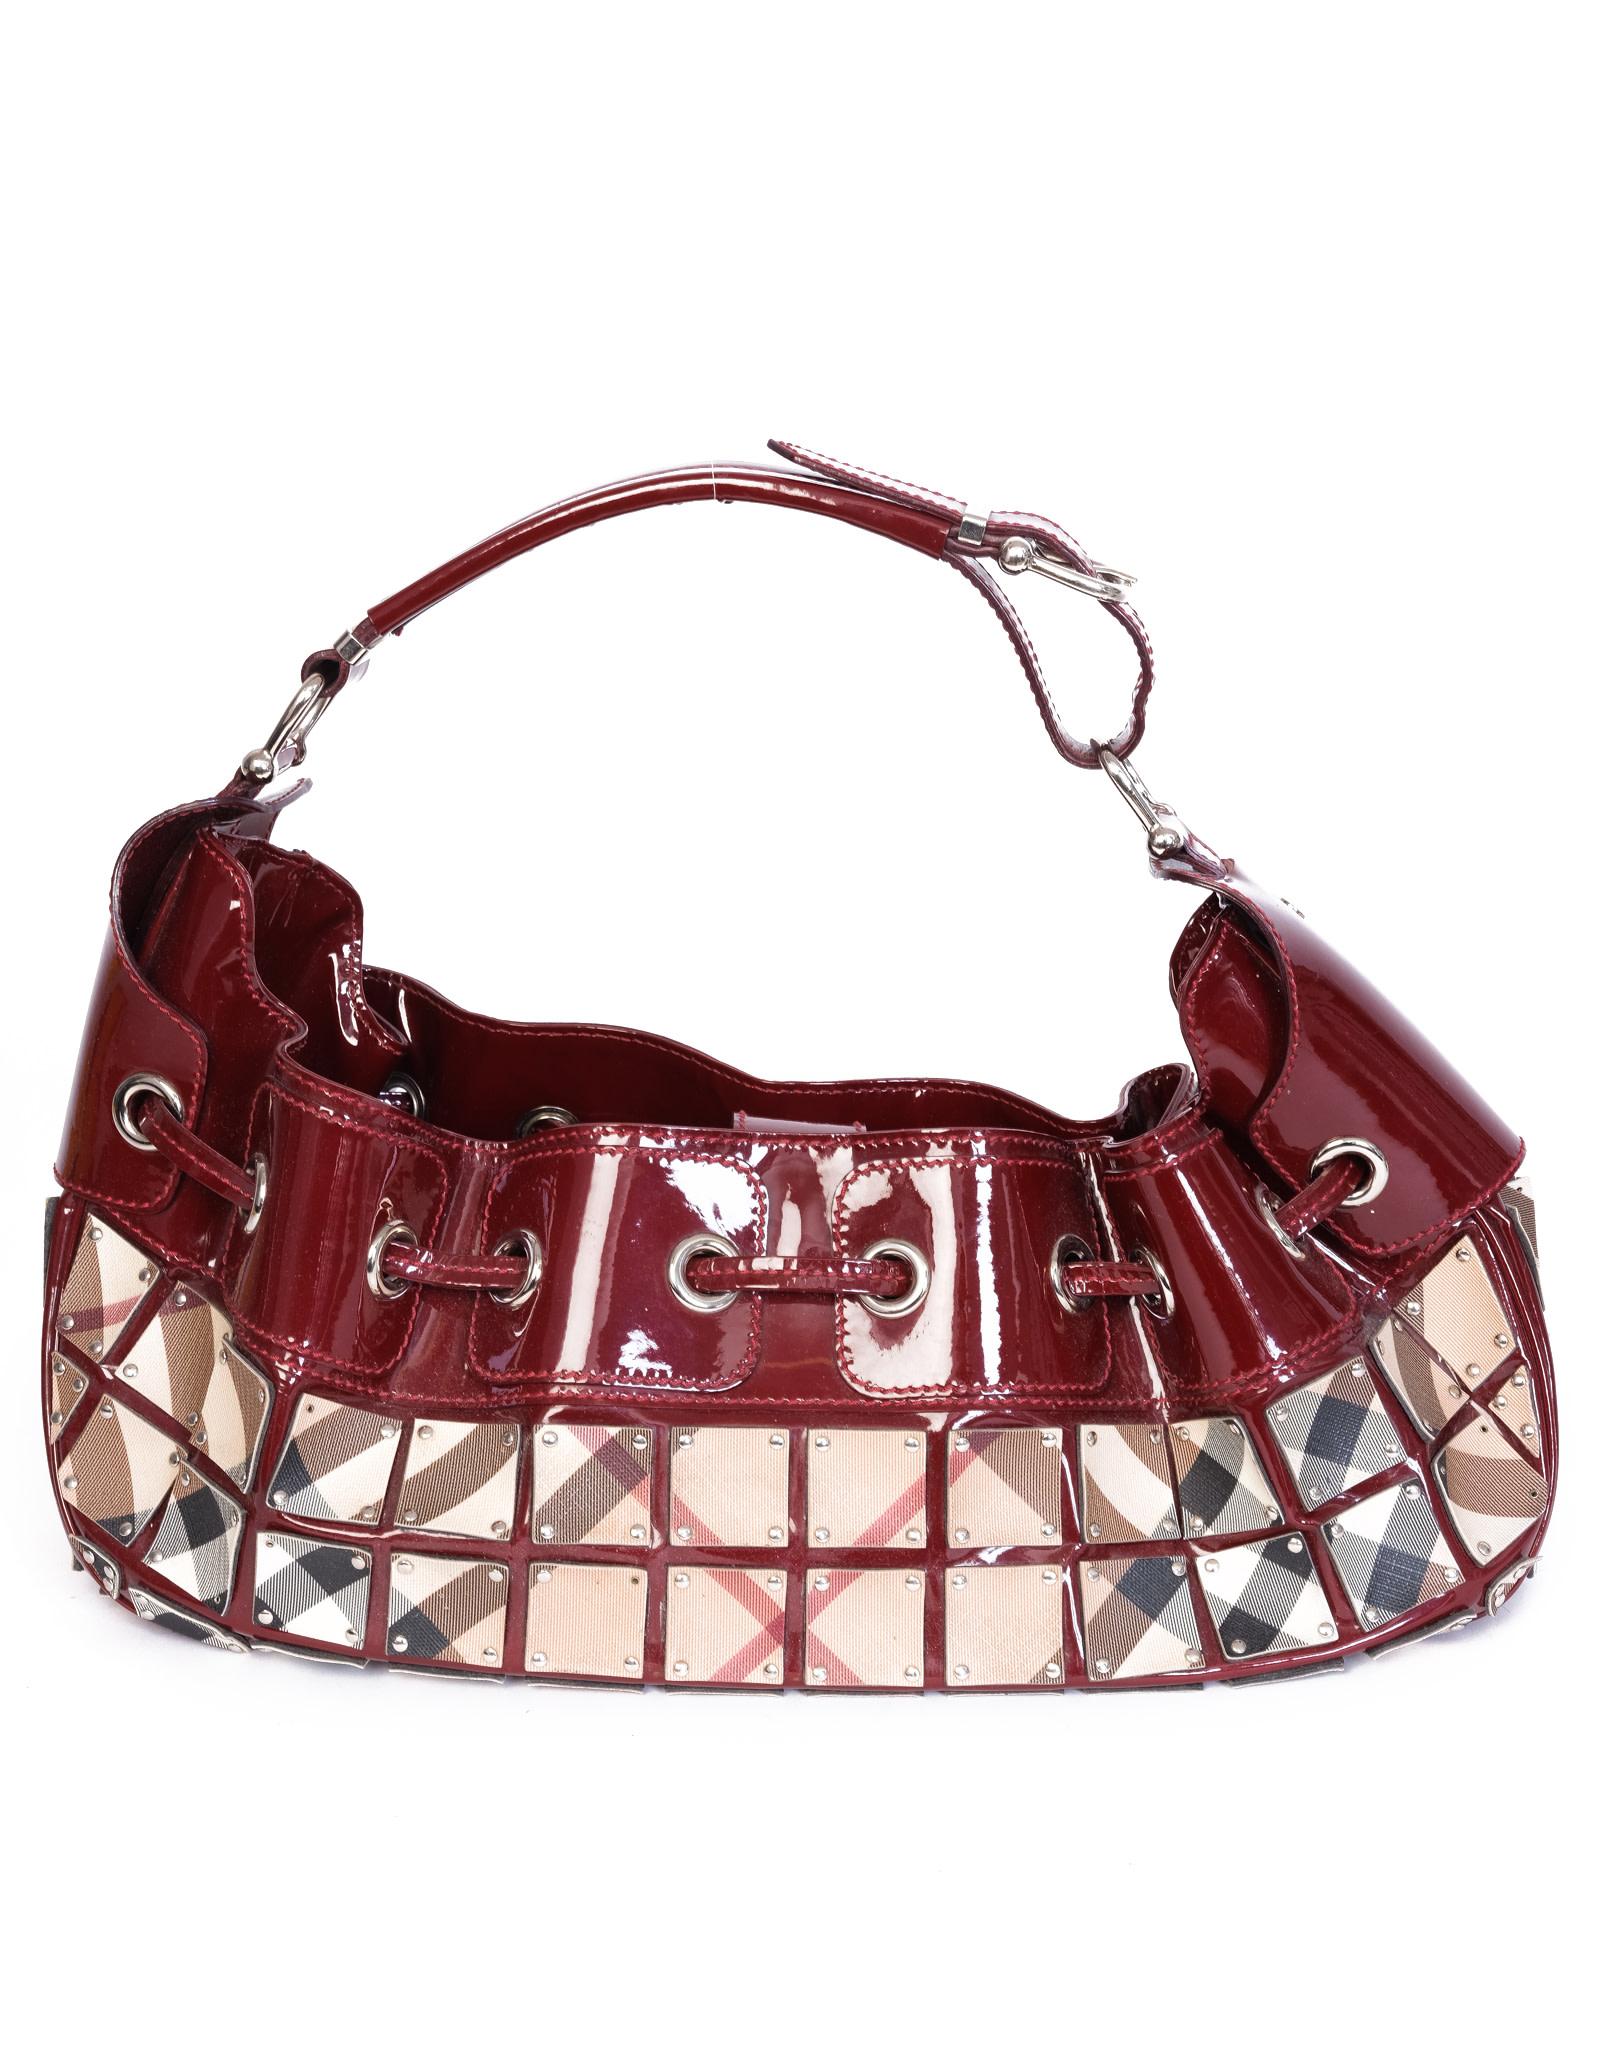 The Warrior shoulder bag features a panelled nova check body, an adjustable flat strap, a drawstring closure & an interior slip compartment. Burgundy Patent leather.	

COLOR: Burgundy (nova)
ITEM CODE: ITEFFSRL314FIR
MATERIAL: Leather & coated